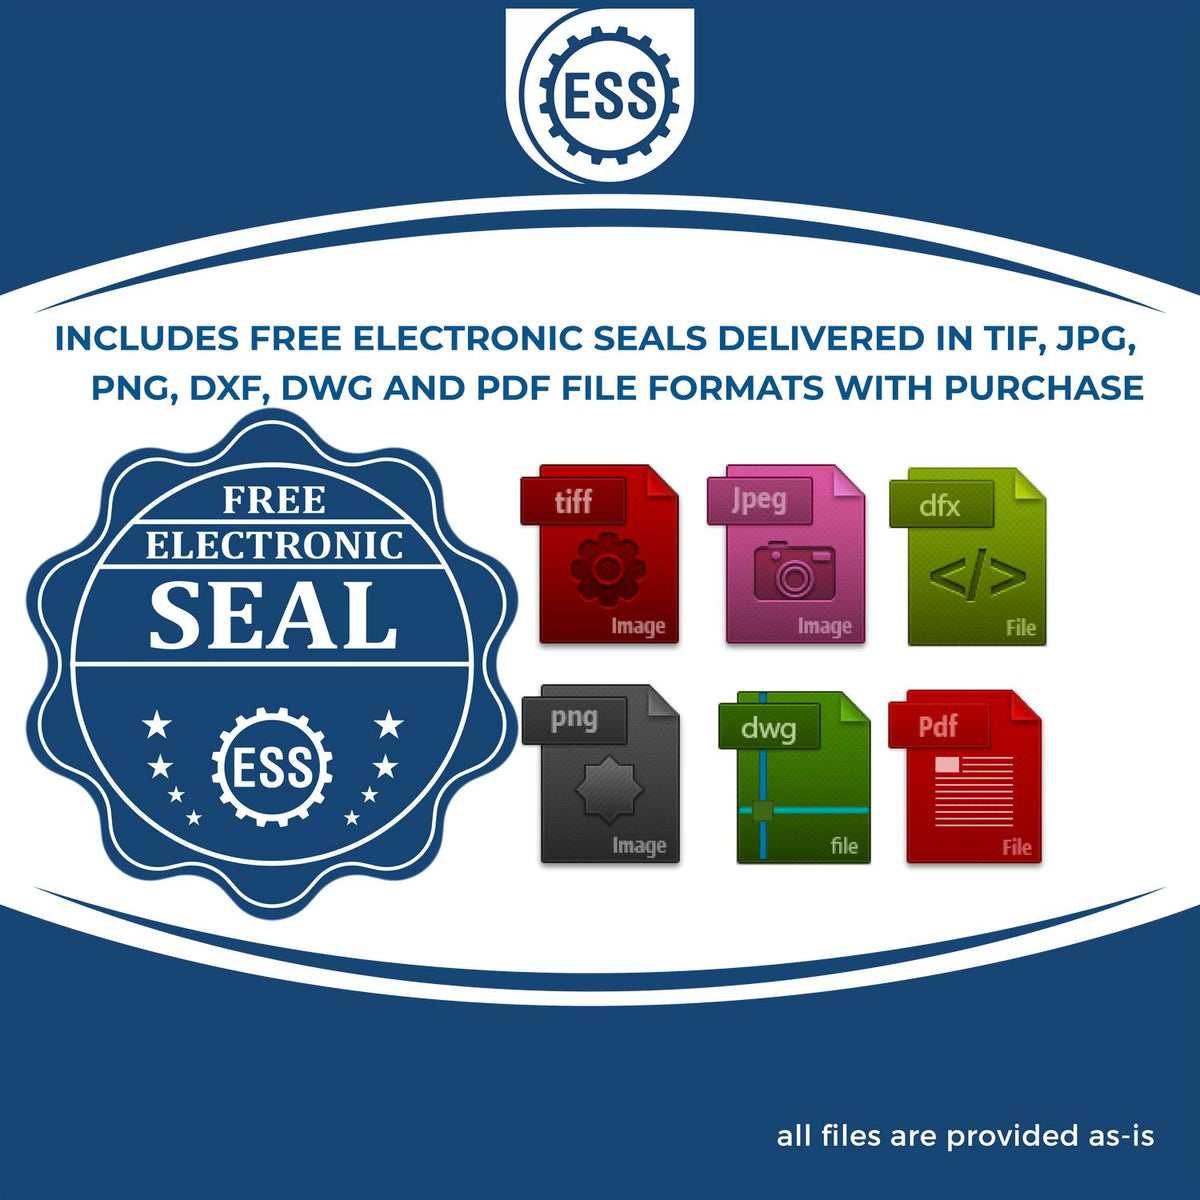 An infographic for the free electronic seal for the Slim Pre-Inked Michigan Professional Engineer Seal Stamp illustrating the different file type icons such as DXF, DWG, TIF, JPG and PNG.